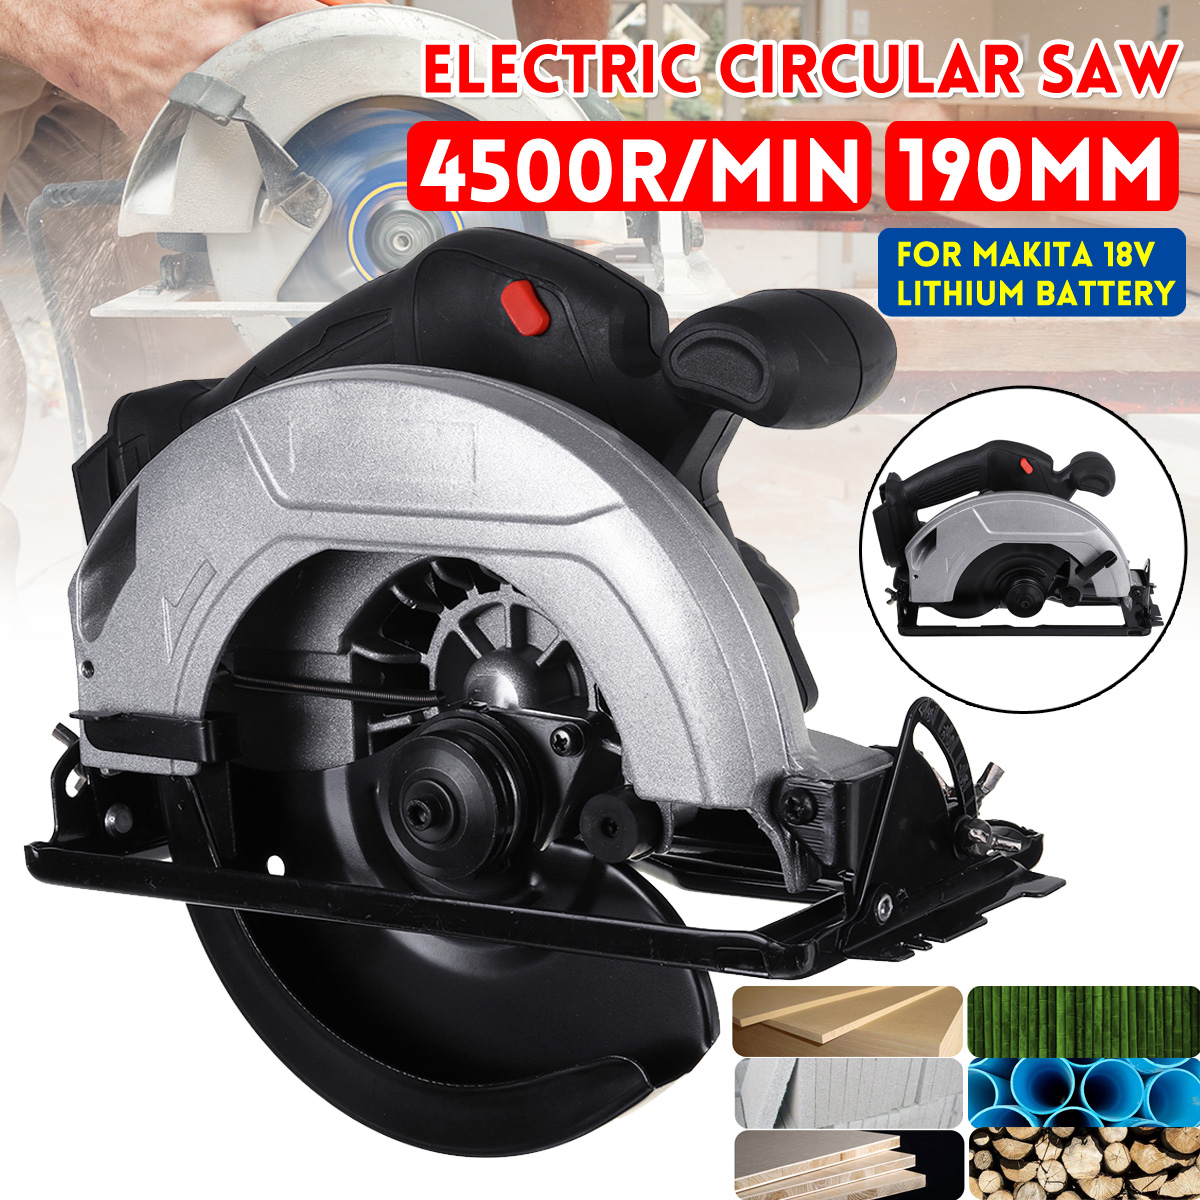 Drillpro-190mm-Electric-Laser-Circular-Saw-Corded-Cutting-Tool-For-Makita-18V-Lithium-Battery-1734554-2